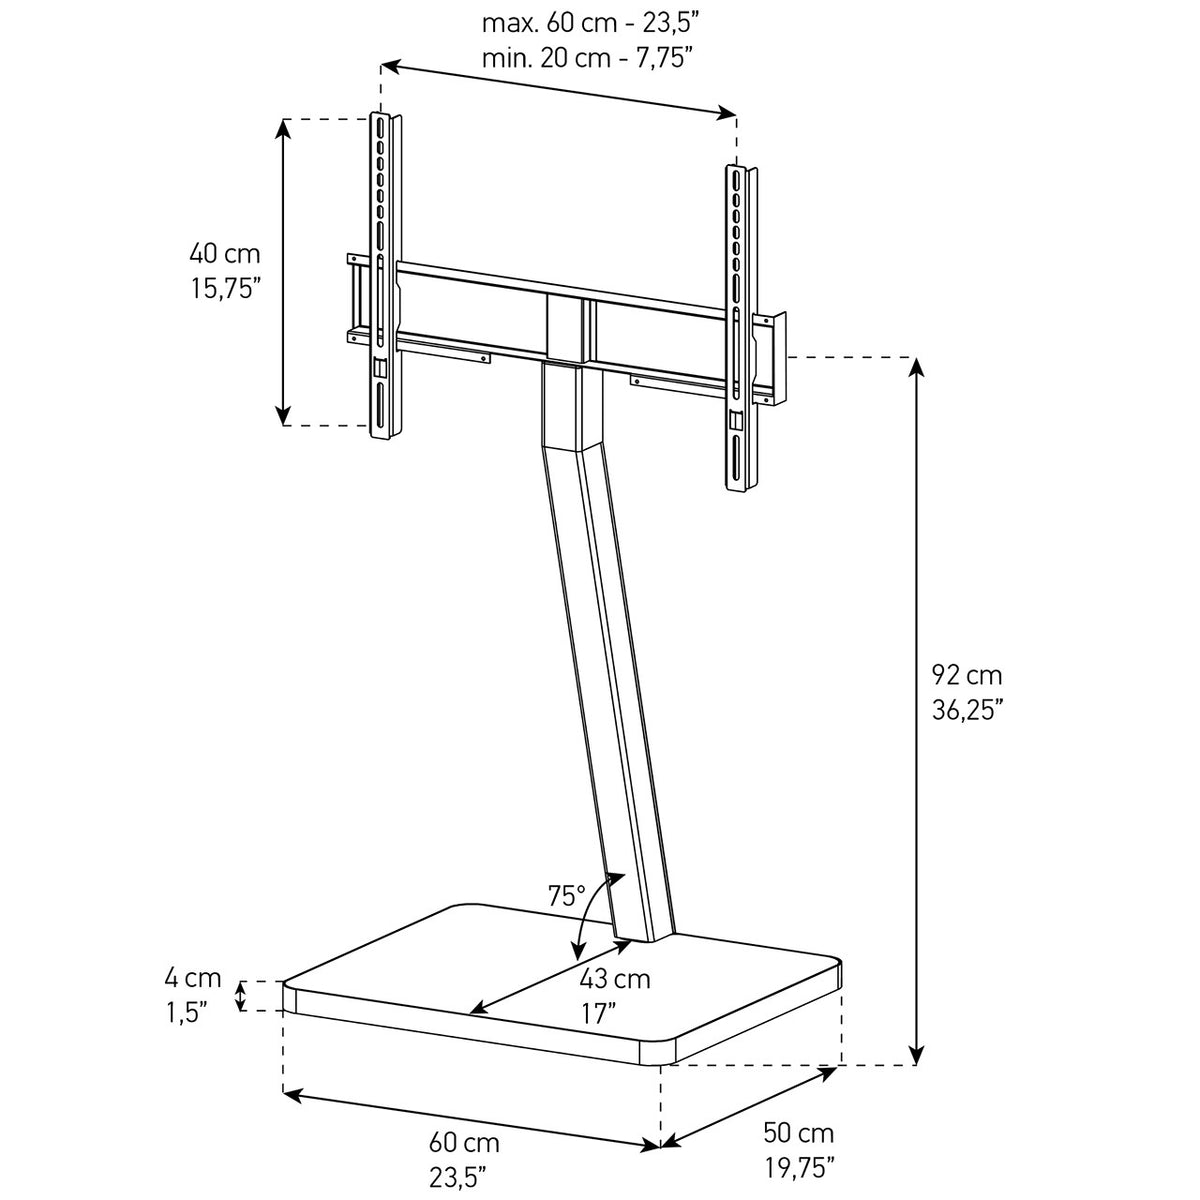 Sonorous PL-2700 Modern TV Floor Stand Mount / Bracket For Sizes up to 65" (Aluminum Construction)